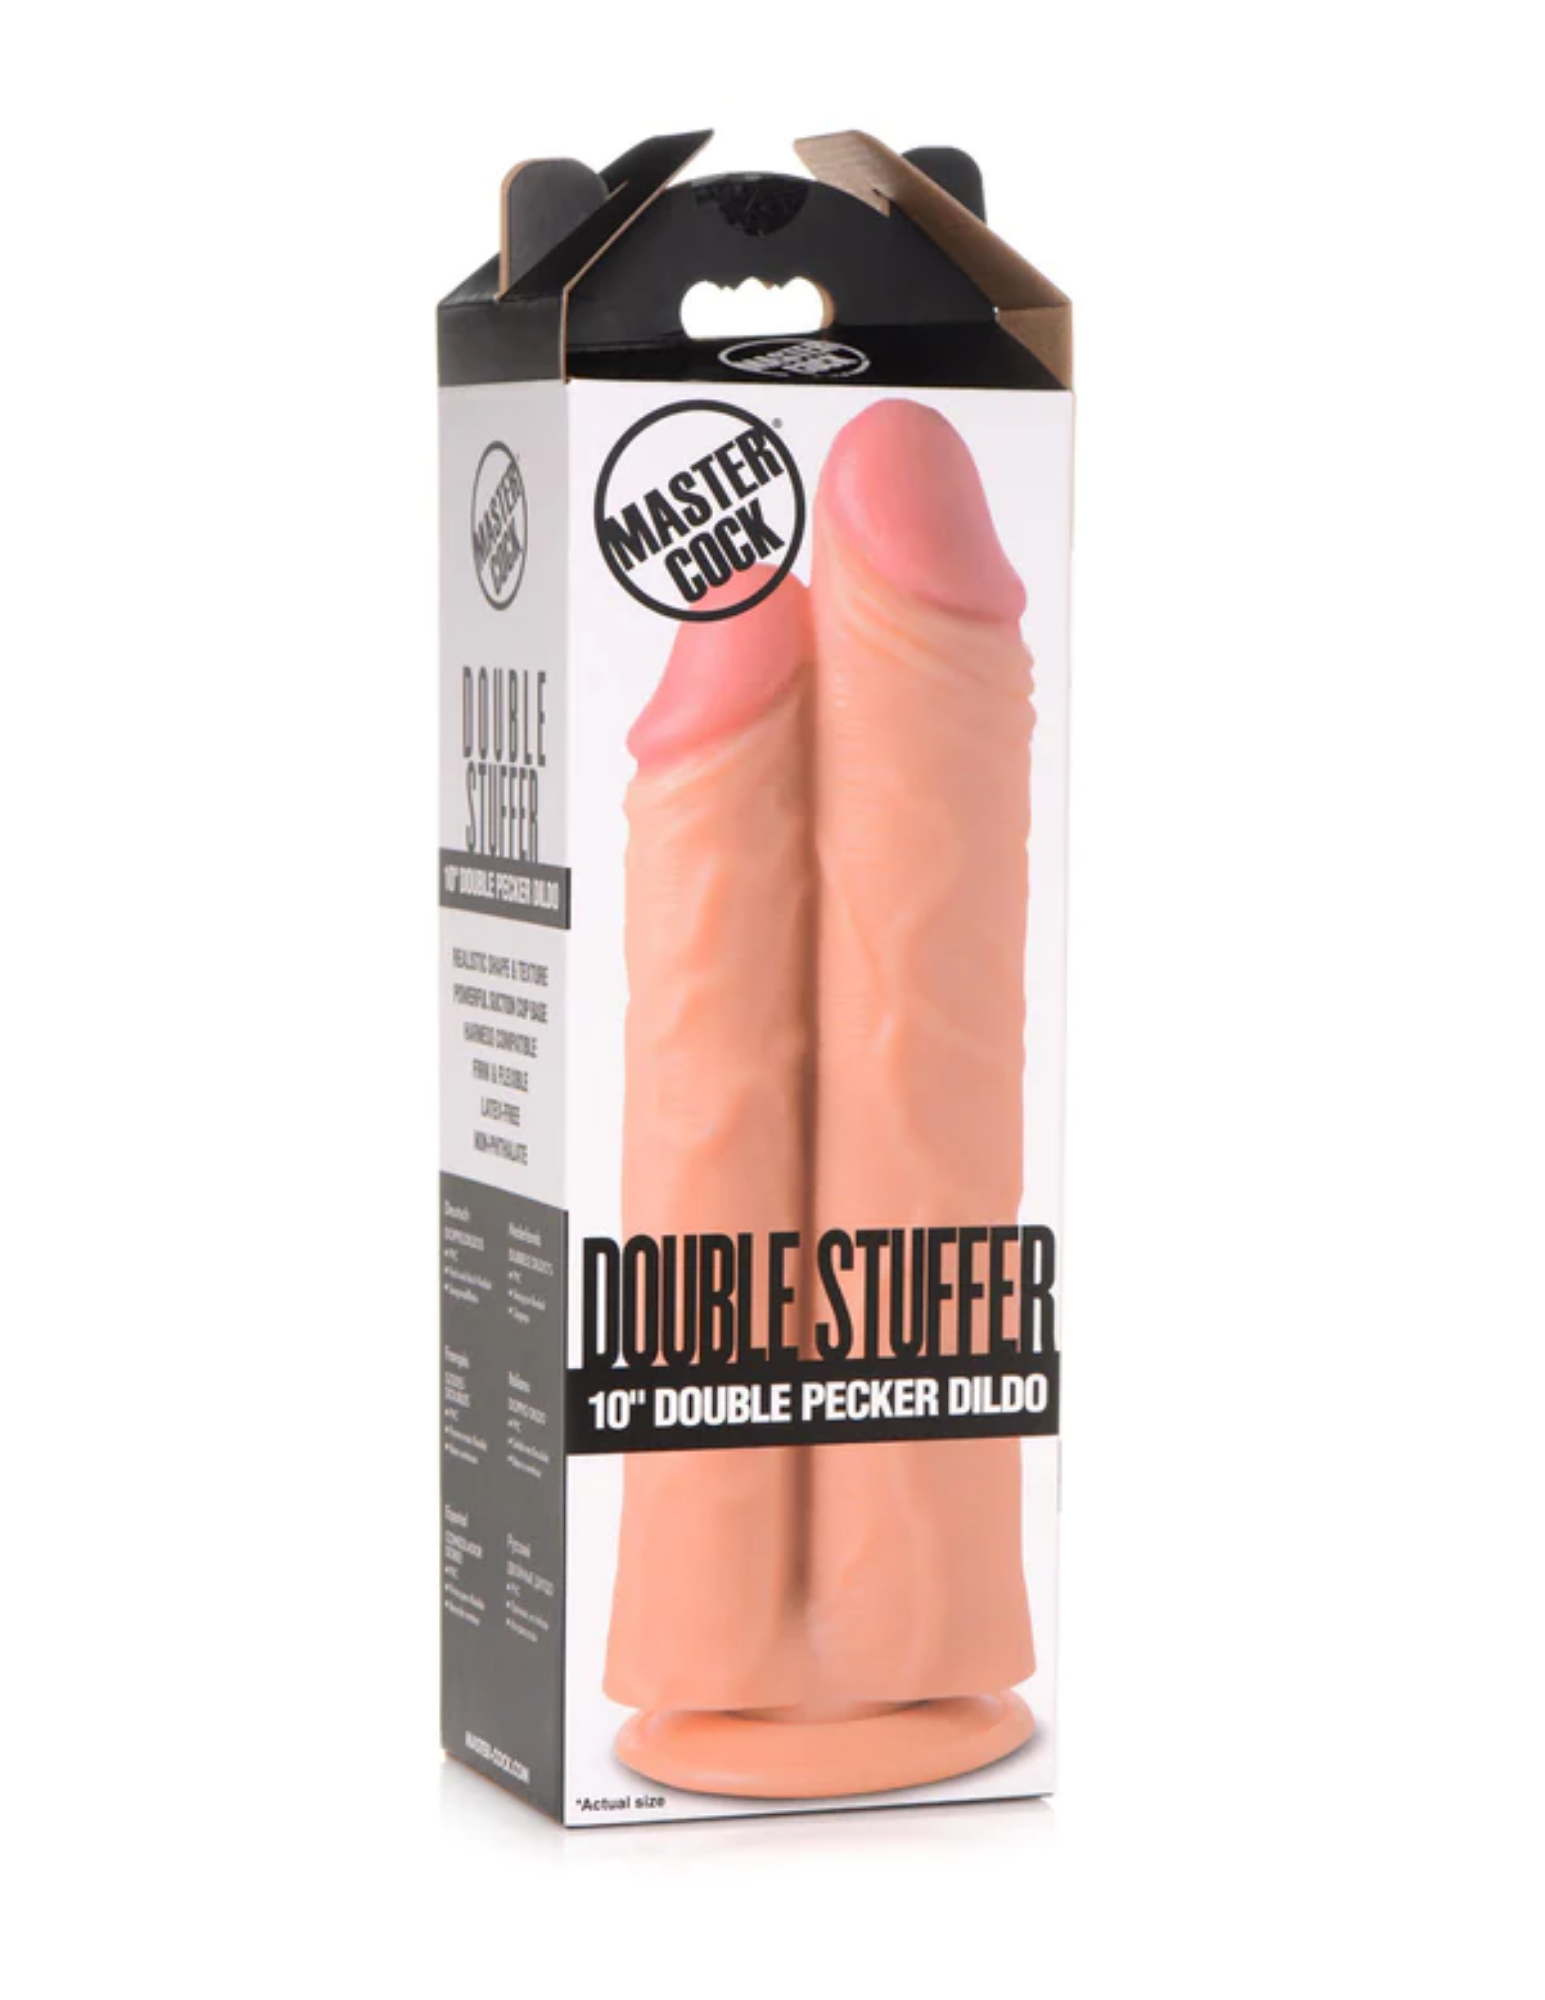 Master Cock Double Stuffer (light) in package.